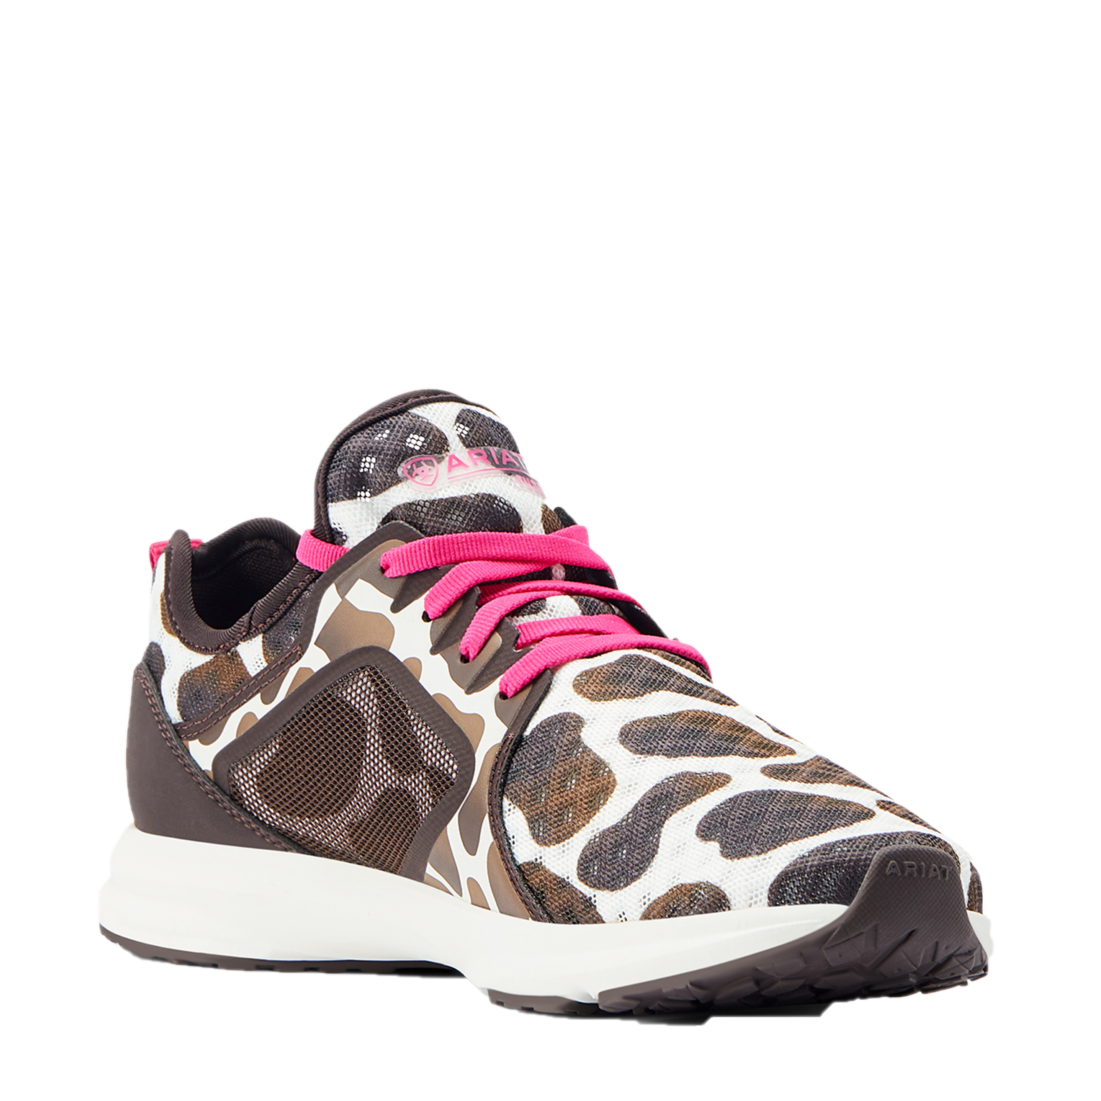 Ariat Ladies Fuse Cow Print Lace Up Sneakers 10044488